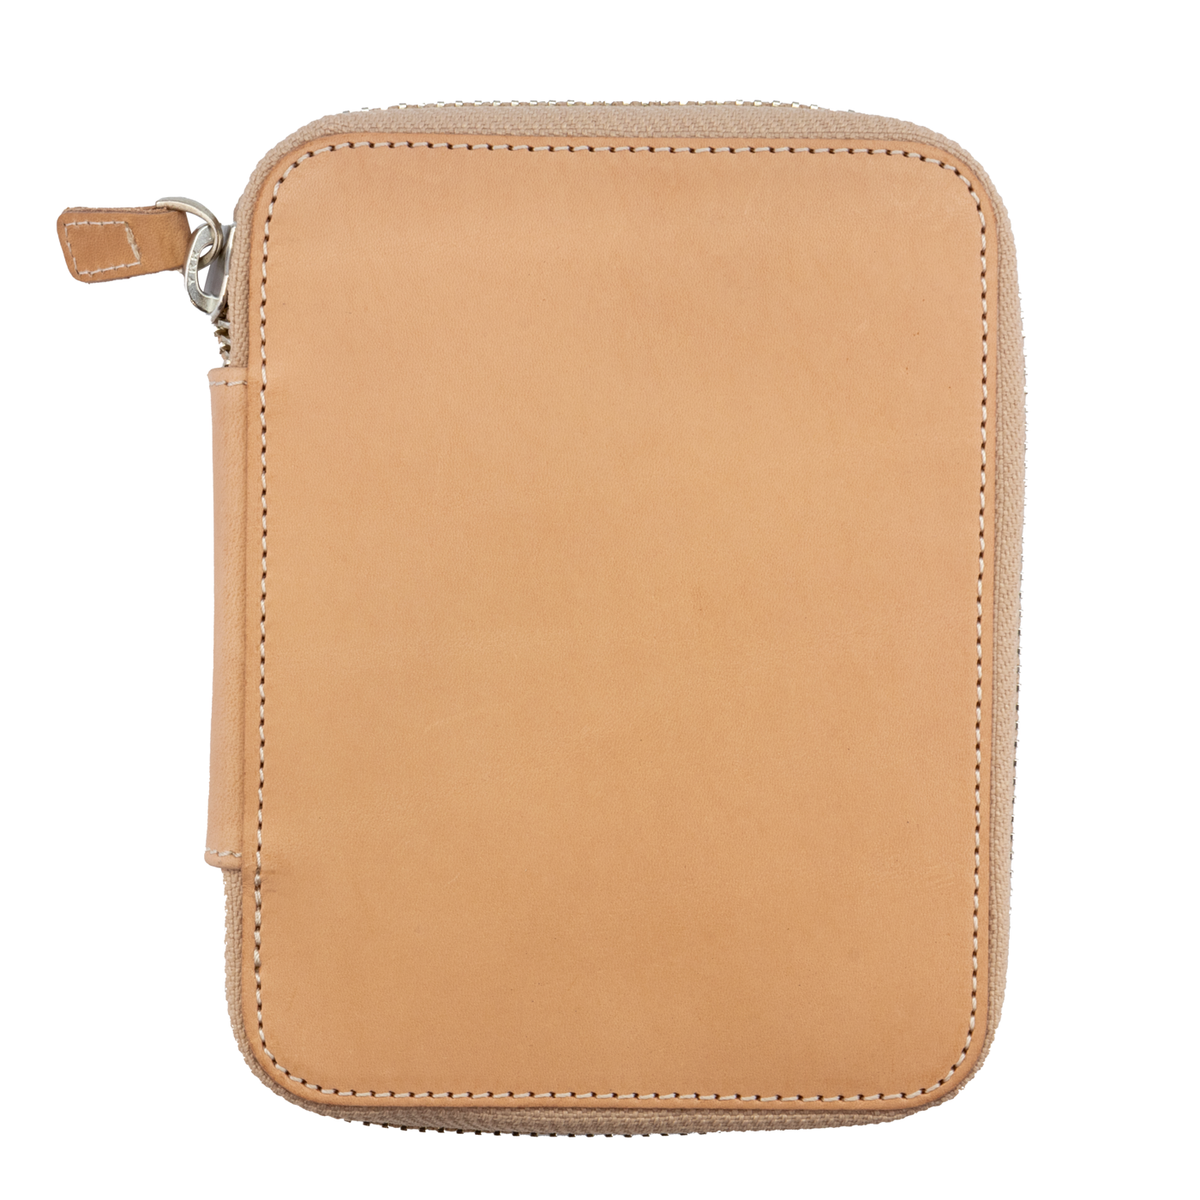 Galen Leather Co. Zippered 10 Slot Pen Case- Undyed Leather